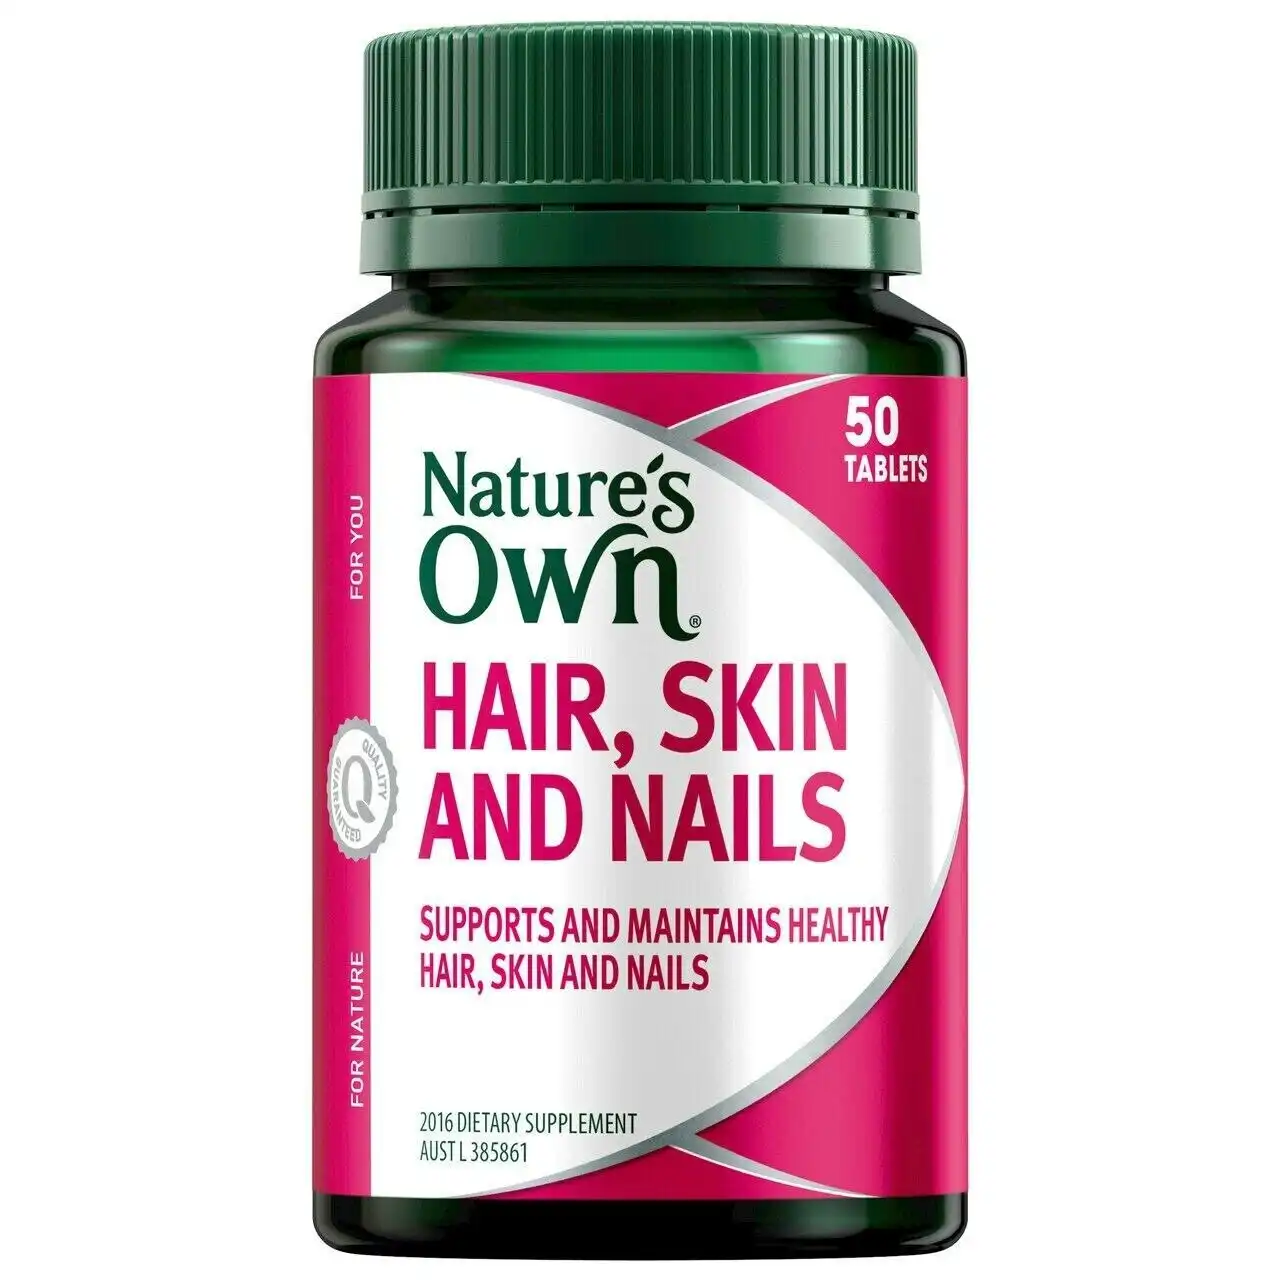 Natures Own Nature's Own Hair, Skin & Nails 50 Tablets